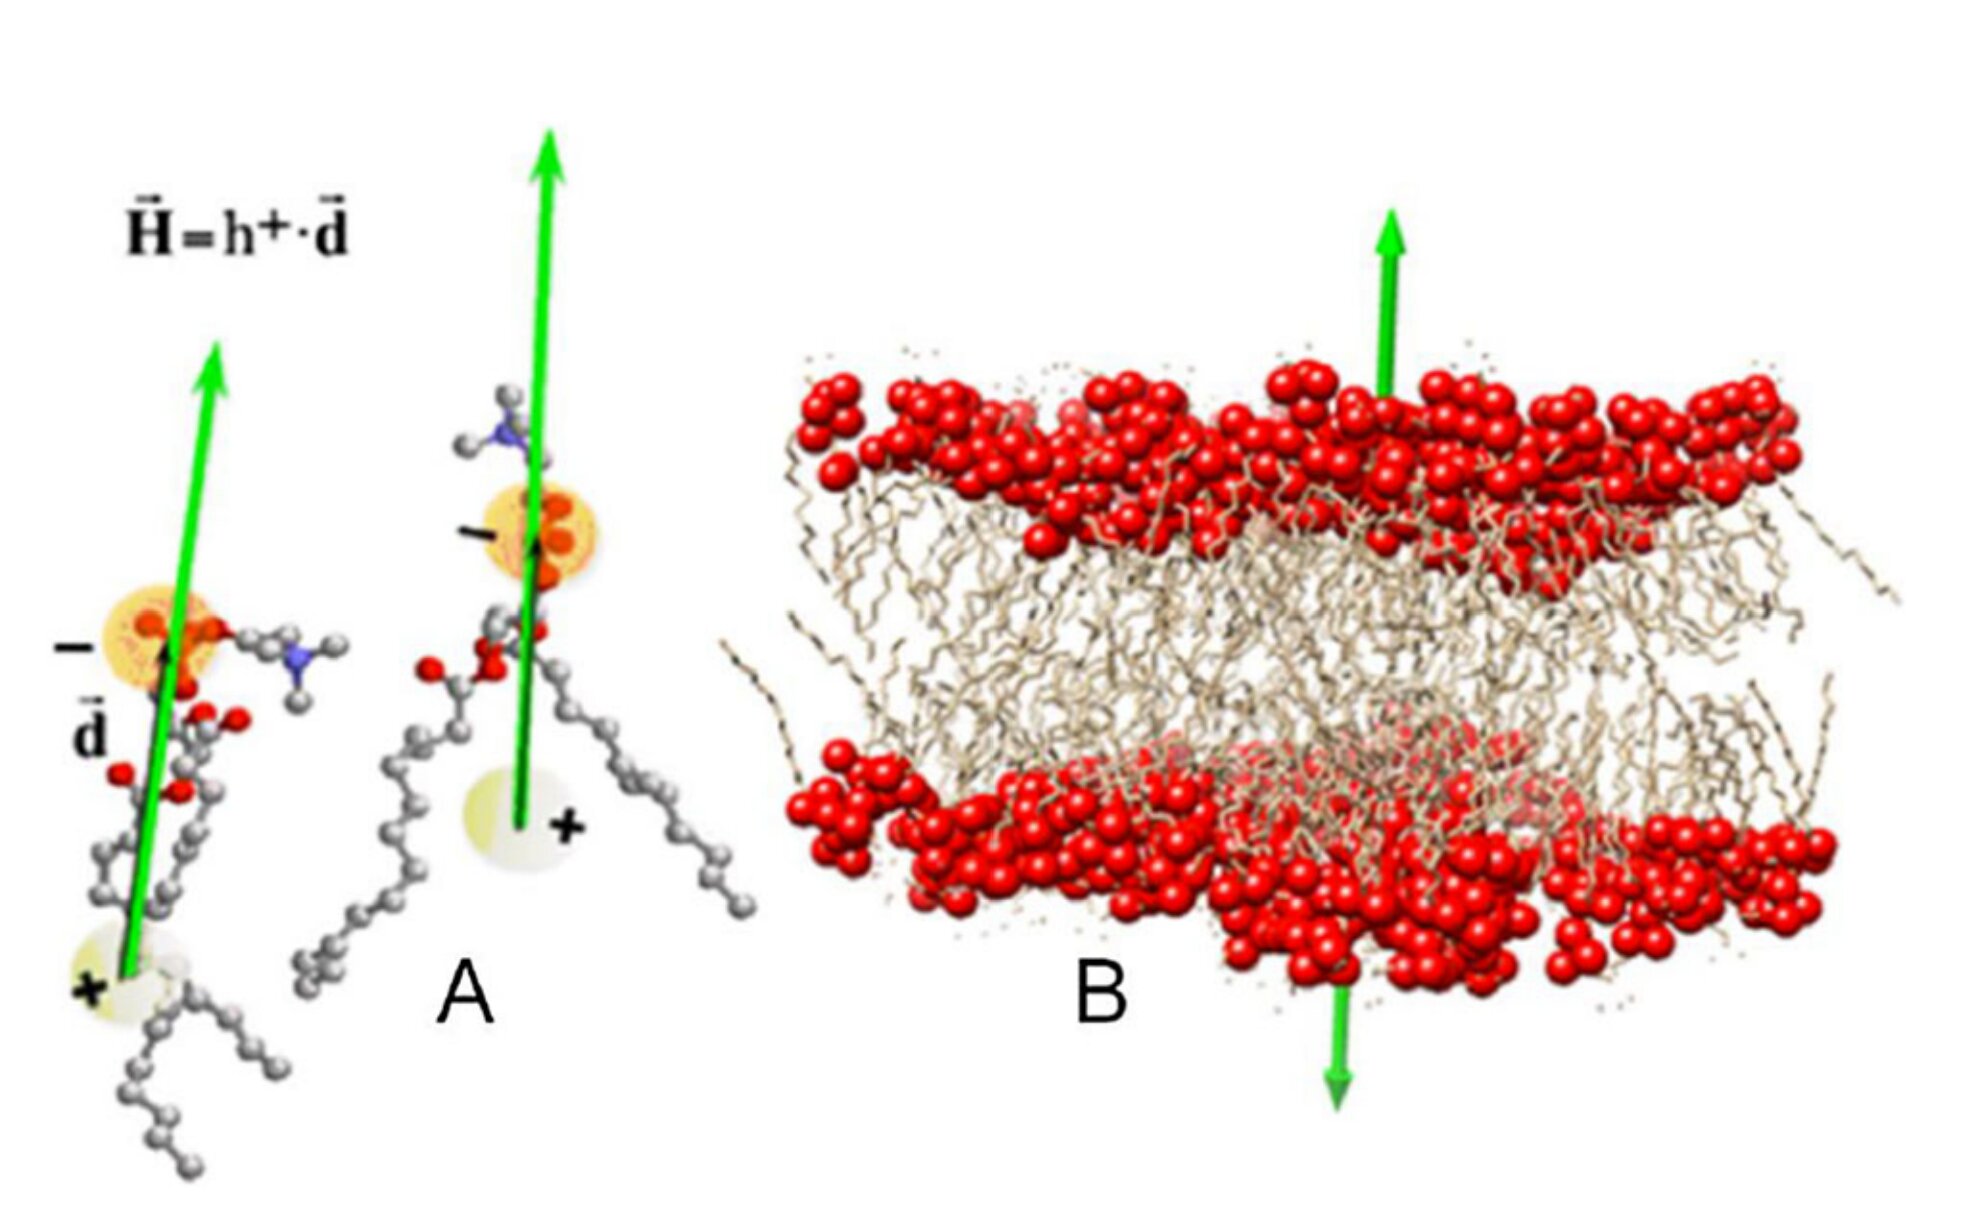 How hydrophobicity shapes protein assemblies